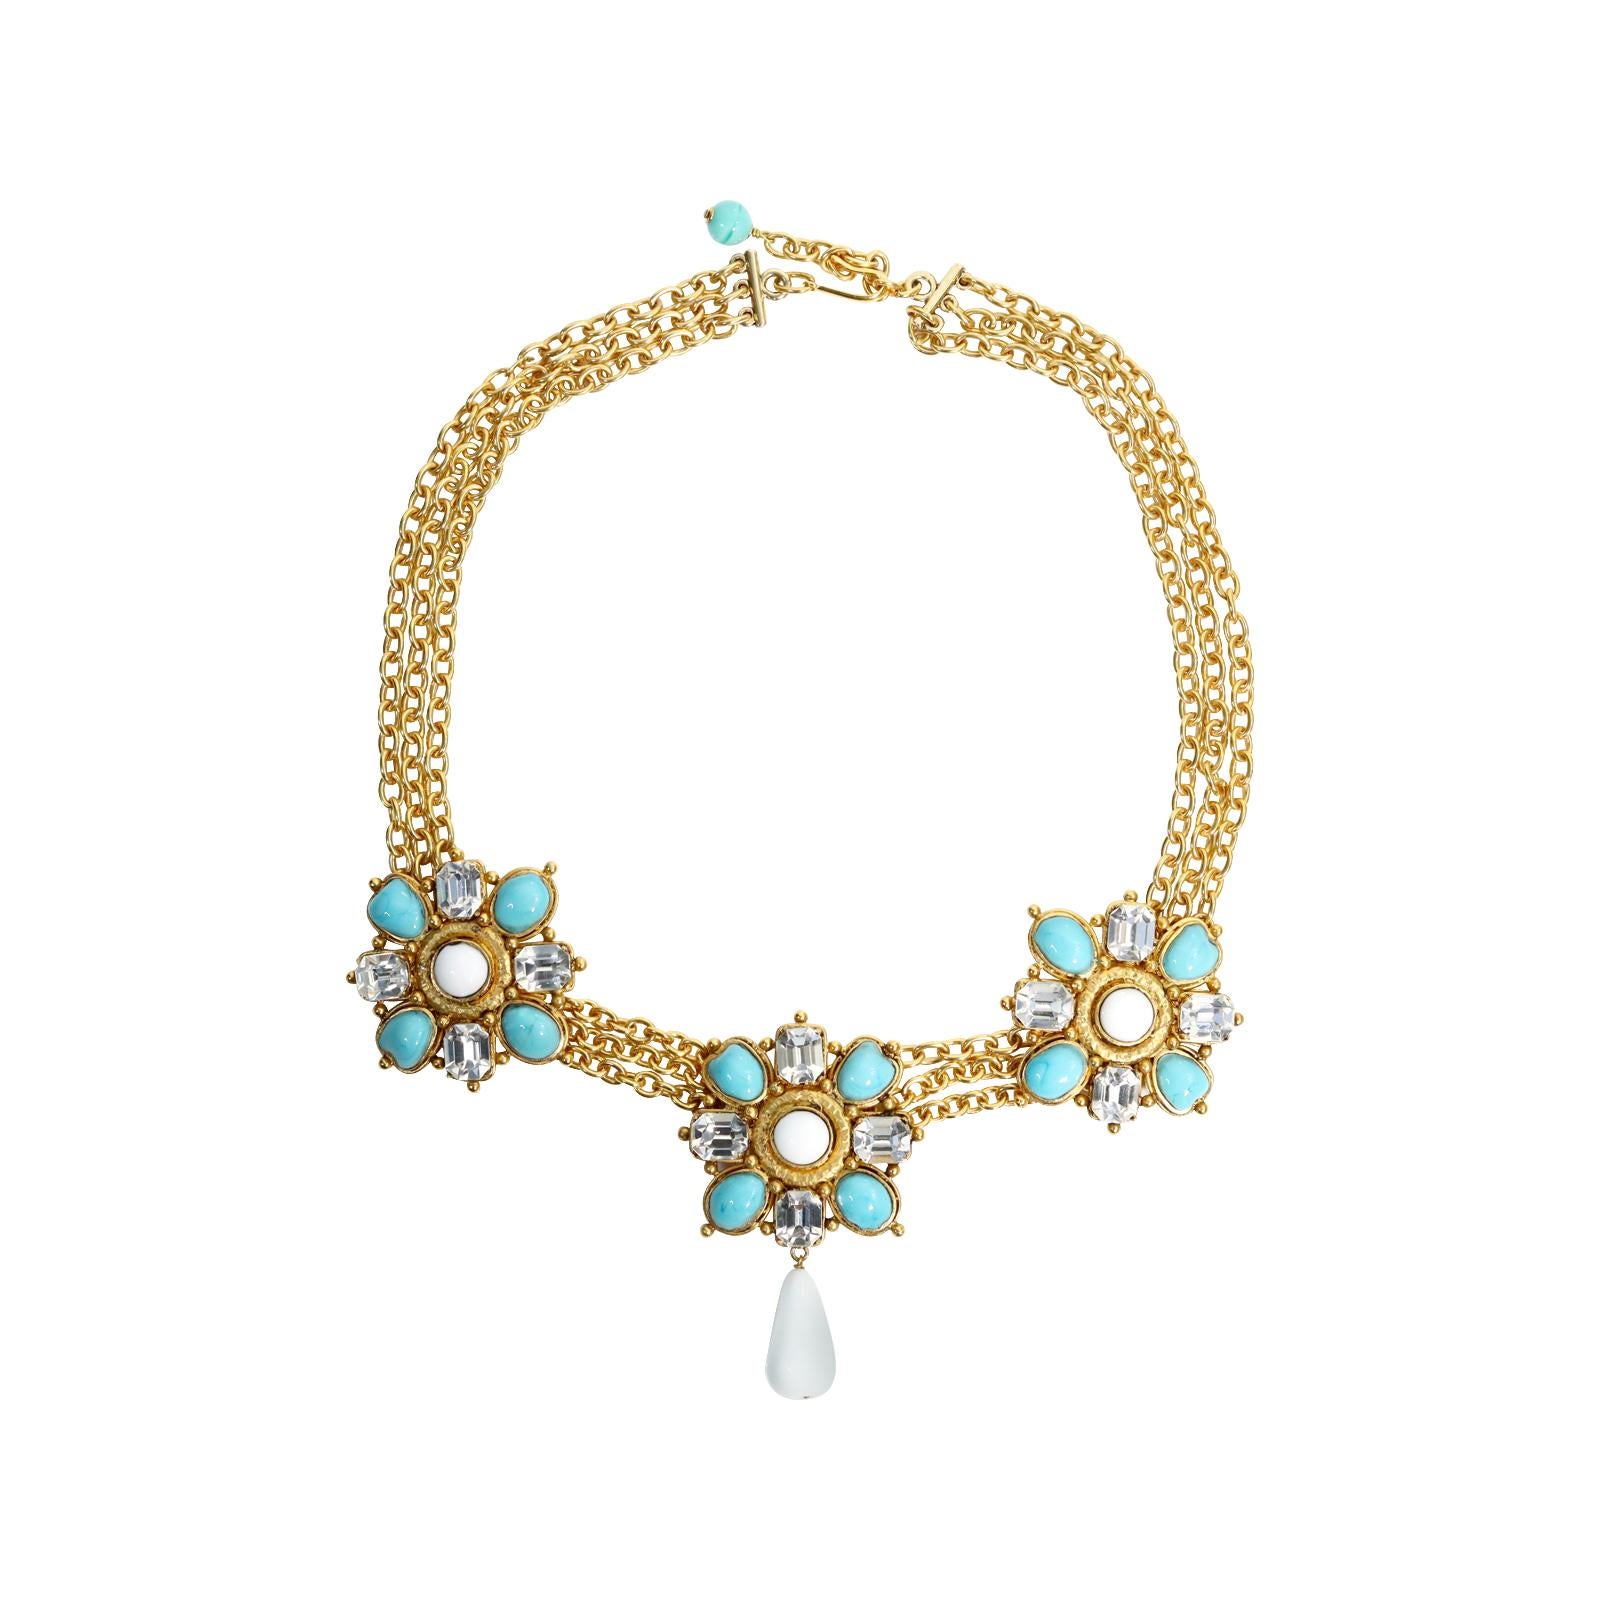 Modern Vintage Maison Gripoix White, Crystal, Faux Turquoise Gold Necklace Circa 1990s For Sale